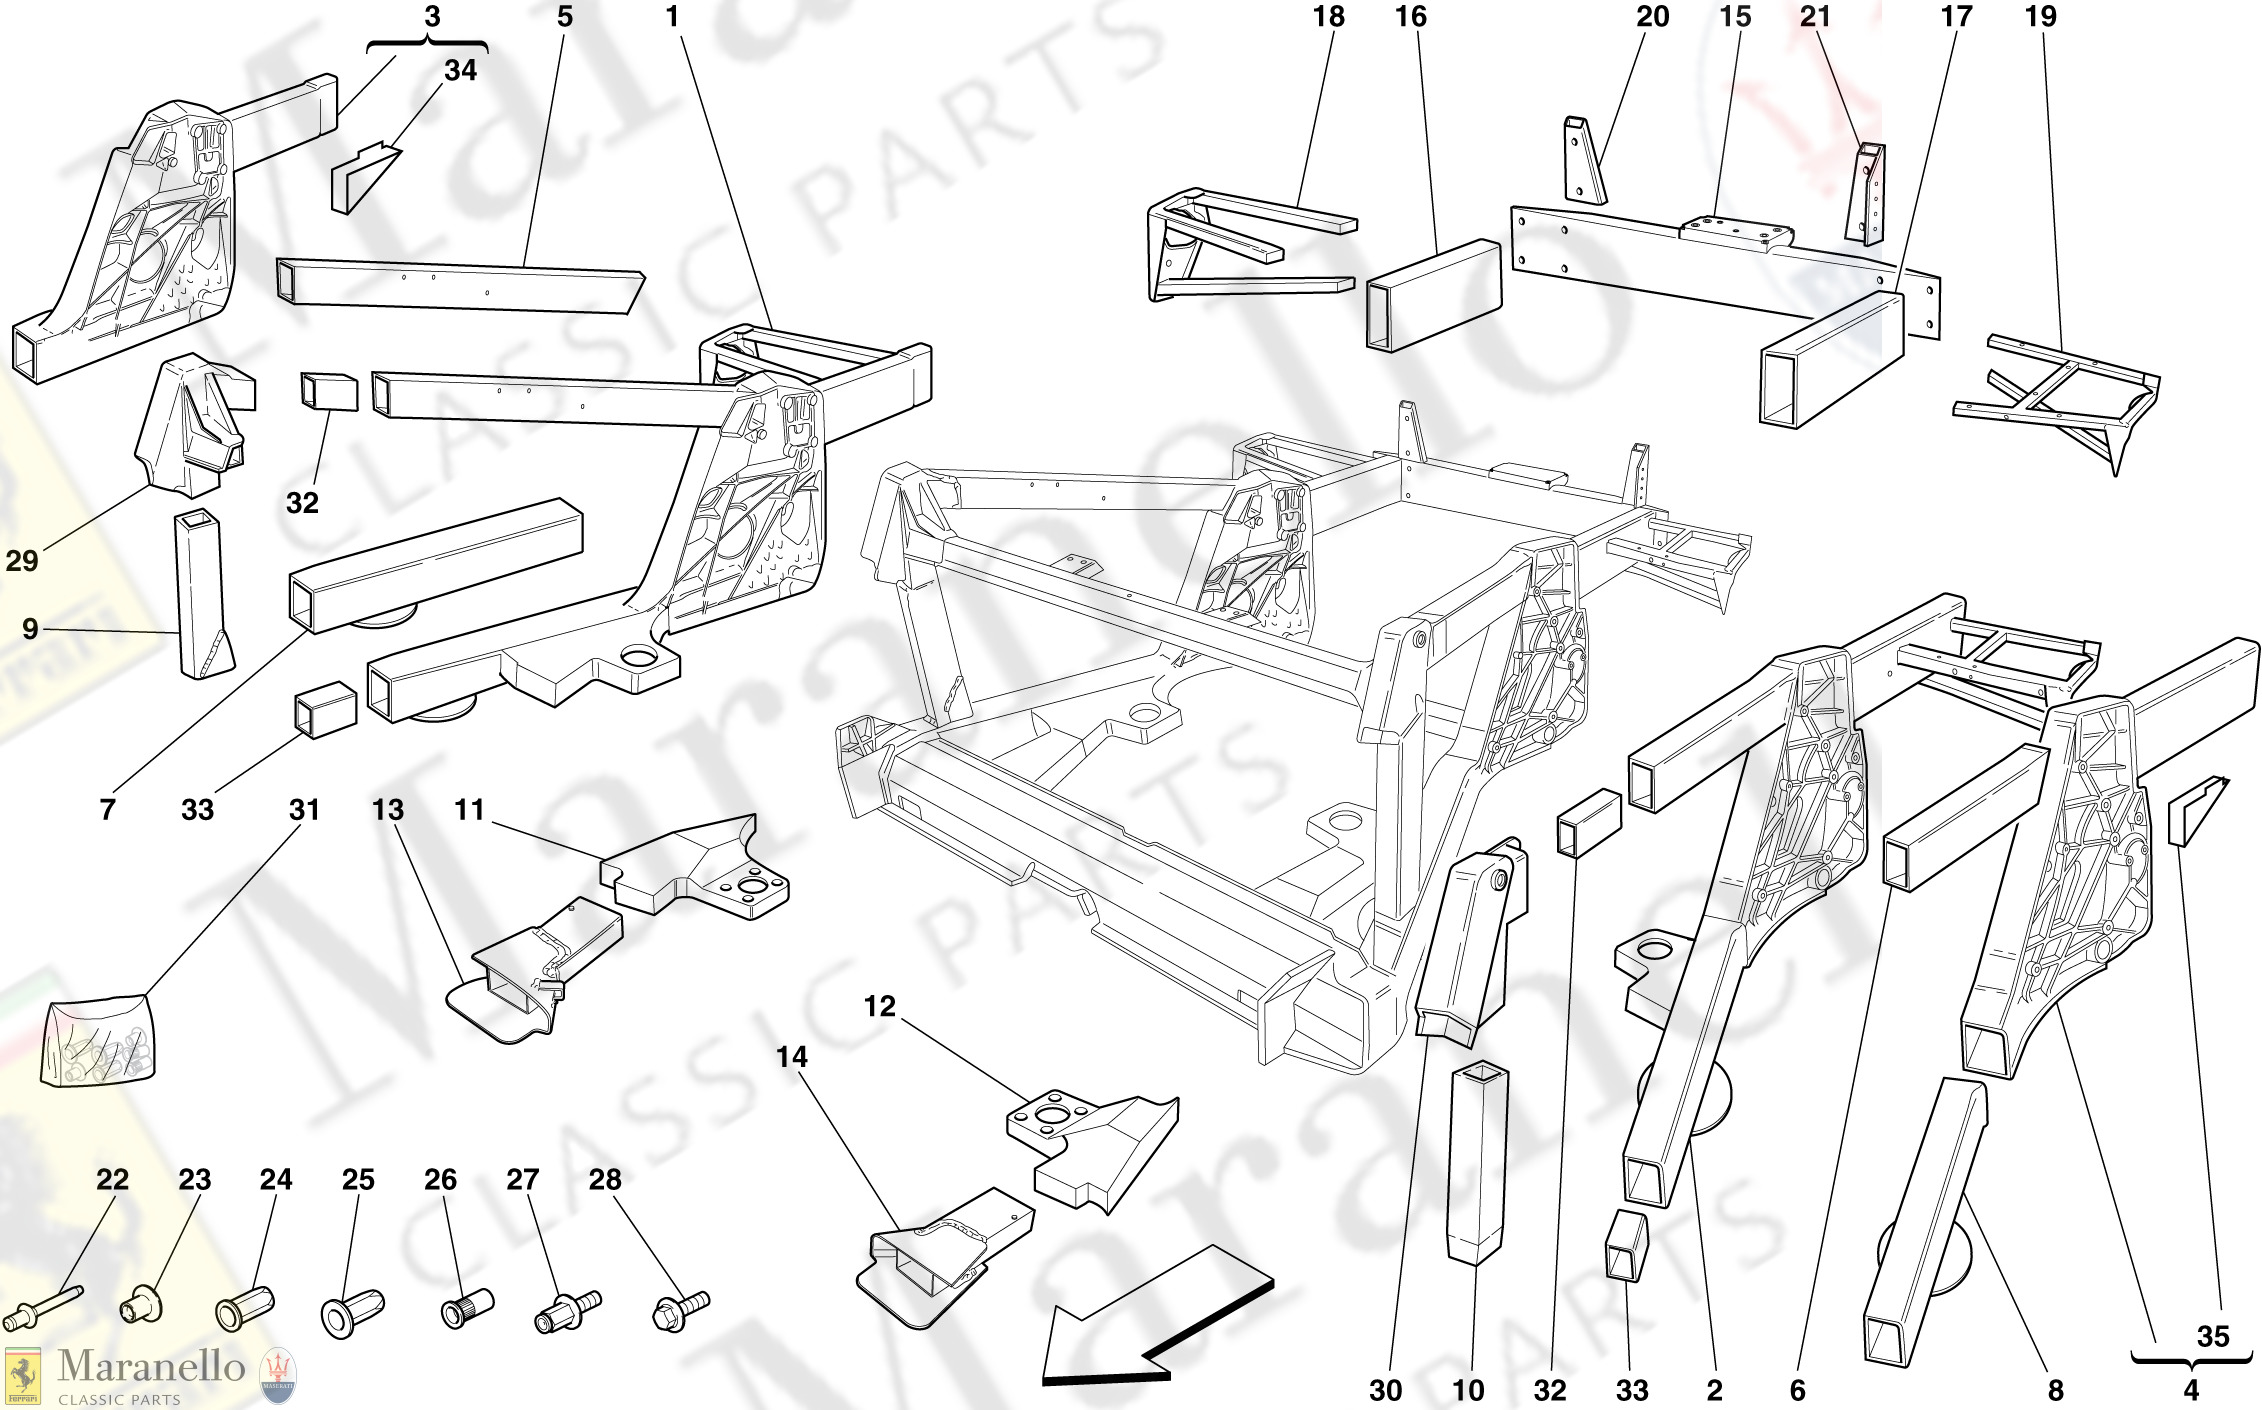 105 - Chassis - Rear Element Subassemblies